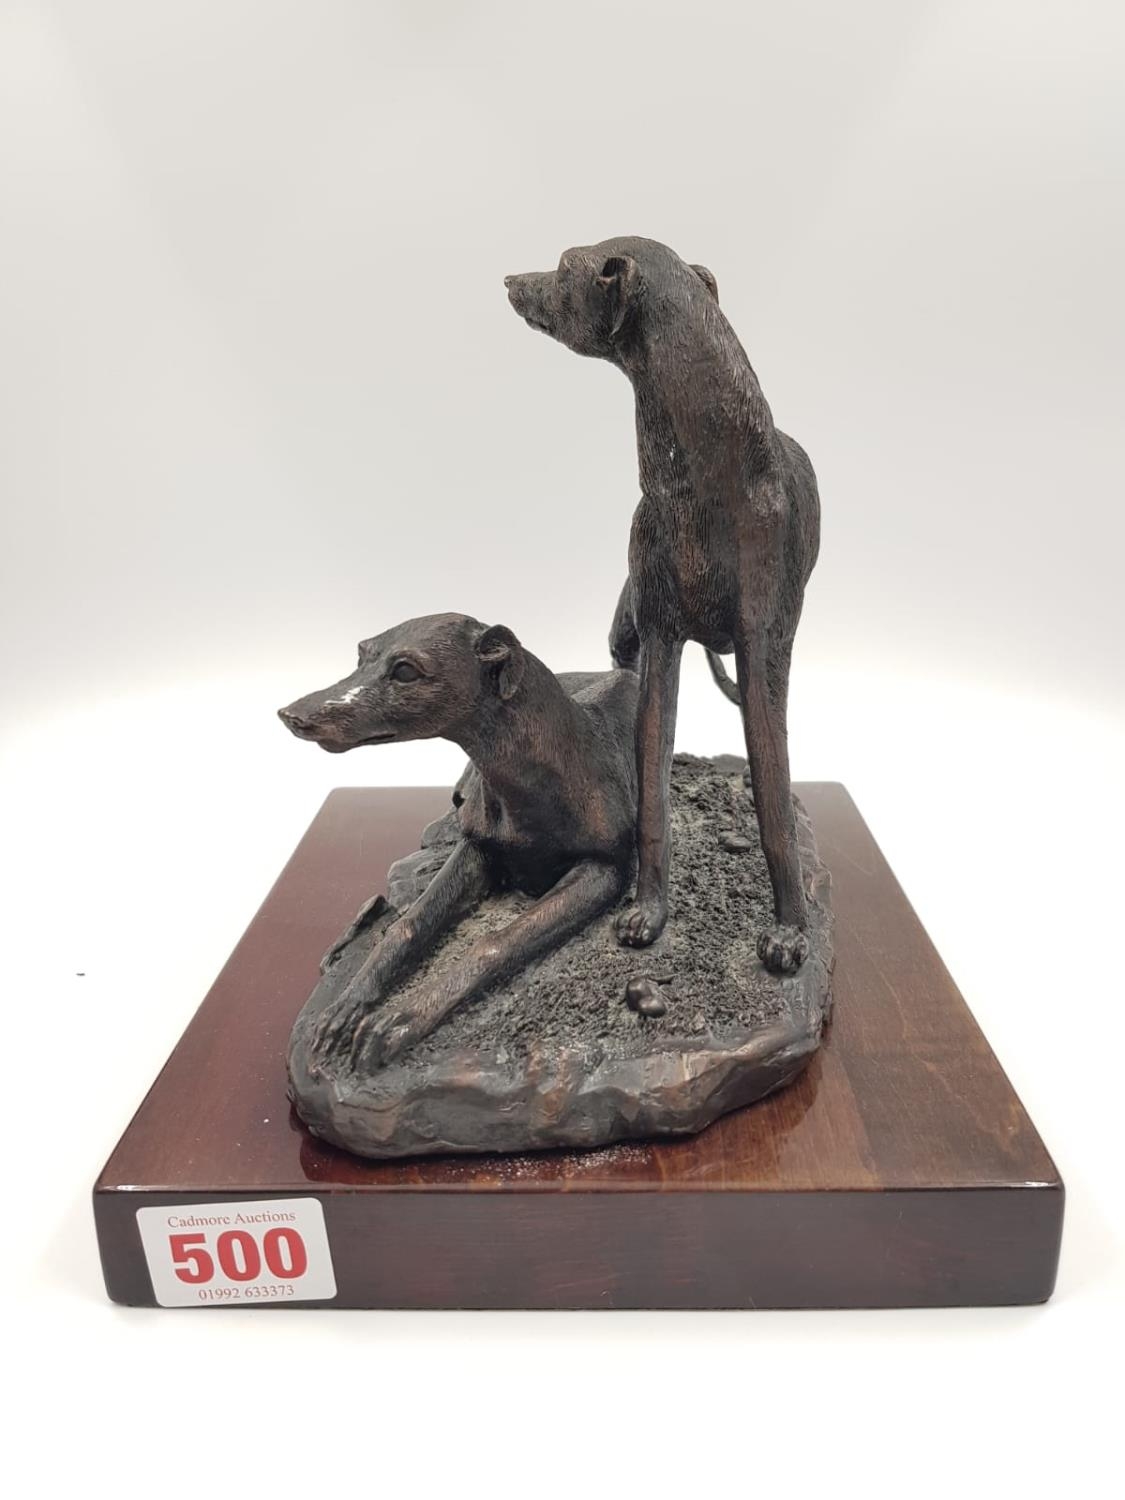 A 2003 signed brass sculpture by Posa - depicting two greyhounds. One at rest, the other alert. - Image 3 of 5